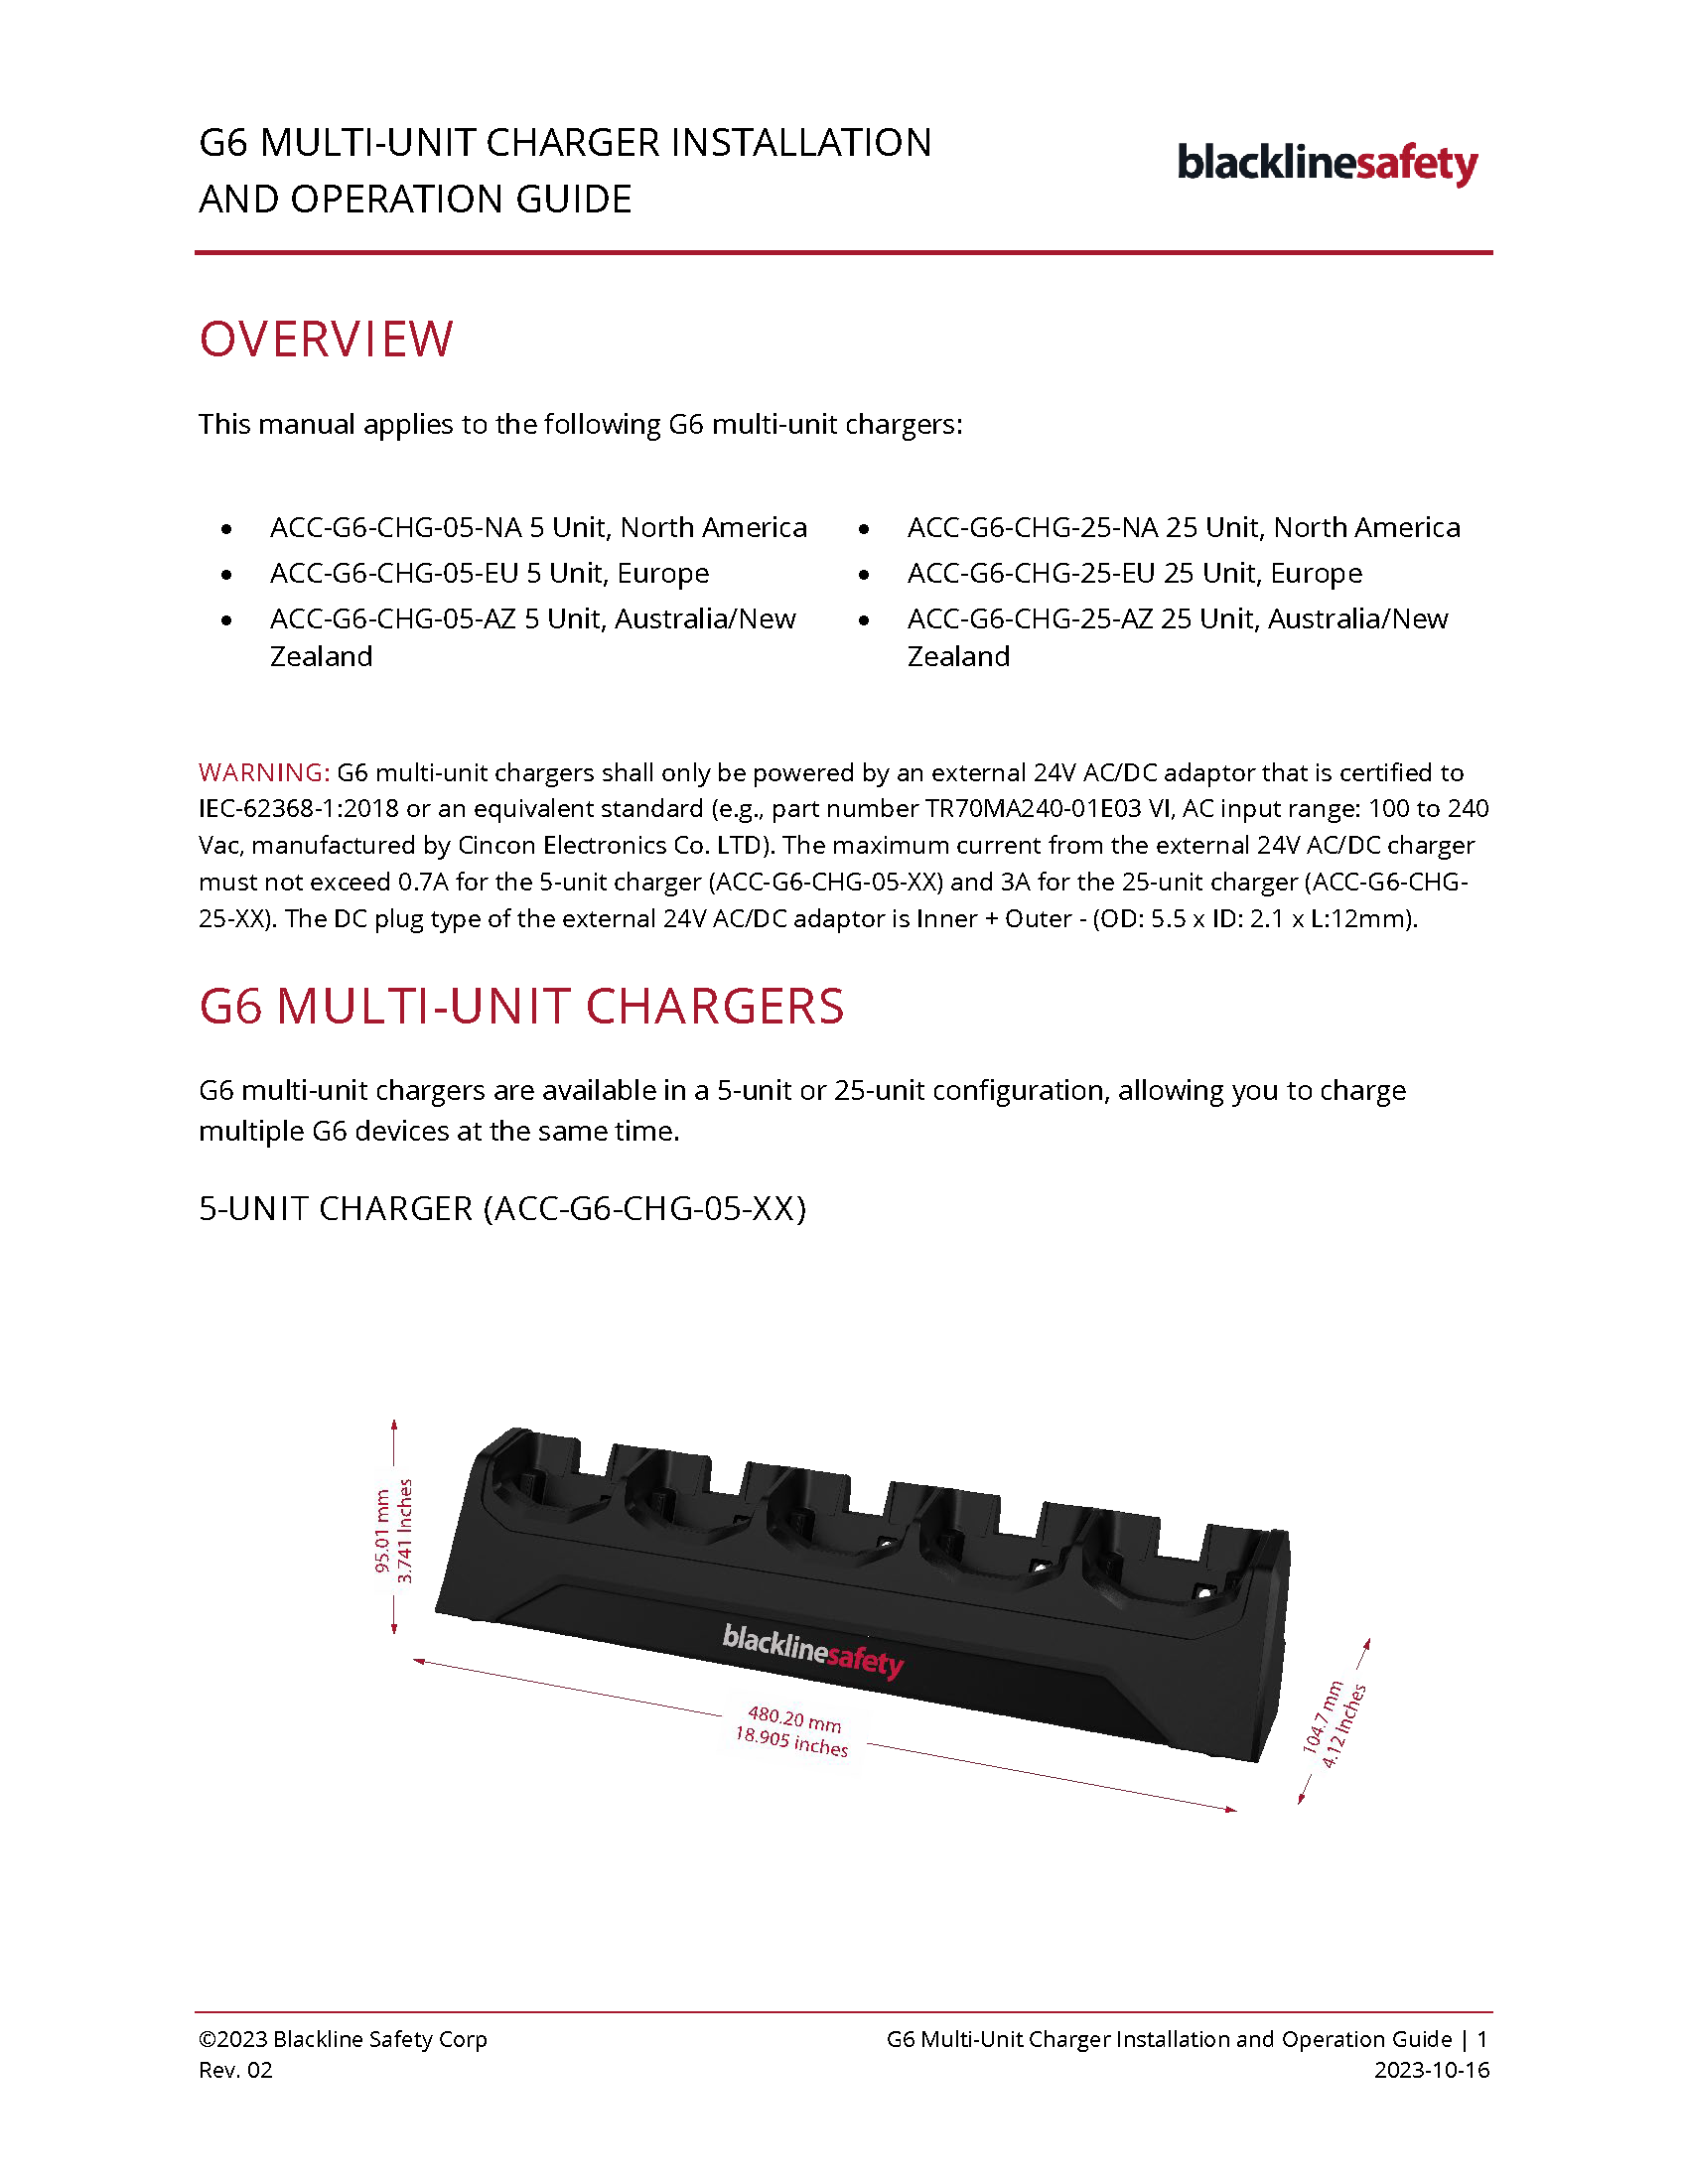 G6 Multi-Unit Charger Installation and Operation Guide_Cover Page